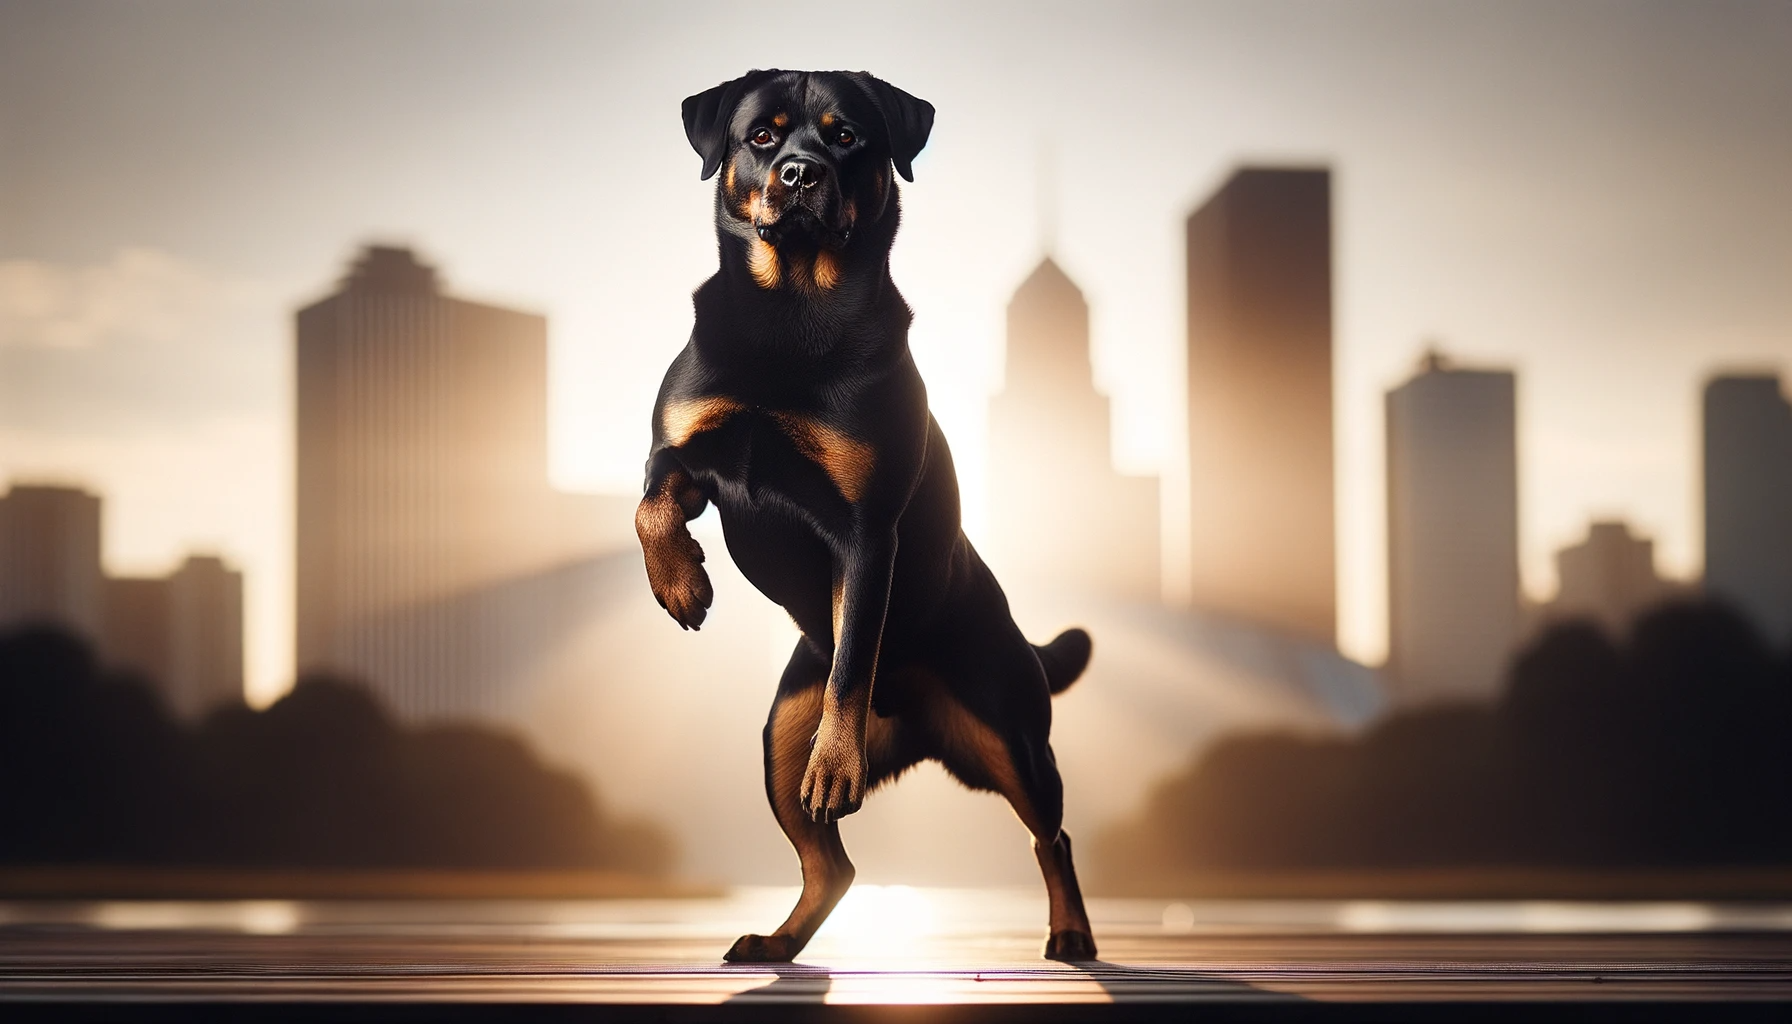 A Rottweiler Lab Mix standing in a superhero pose, ready to leap into action